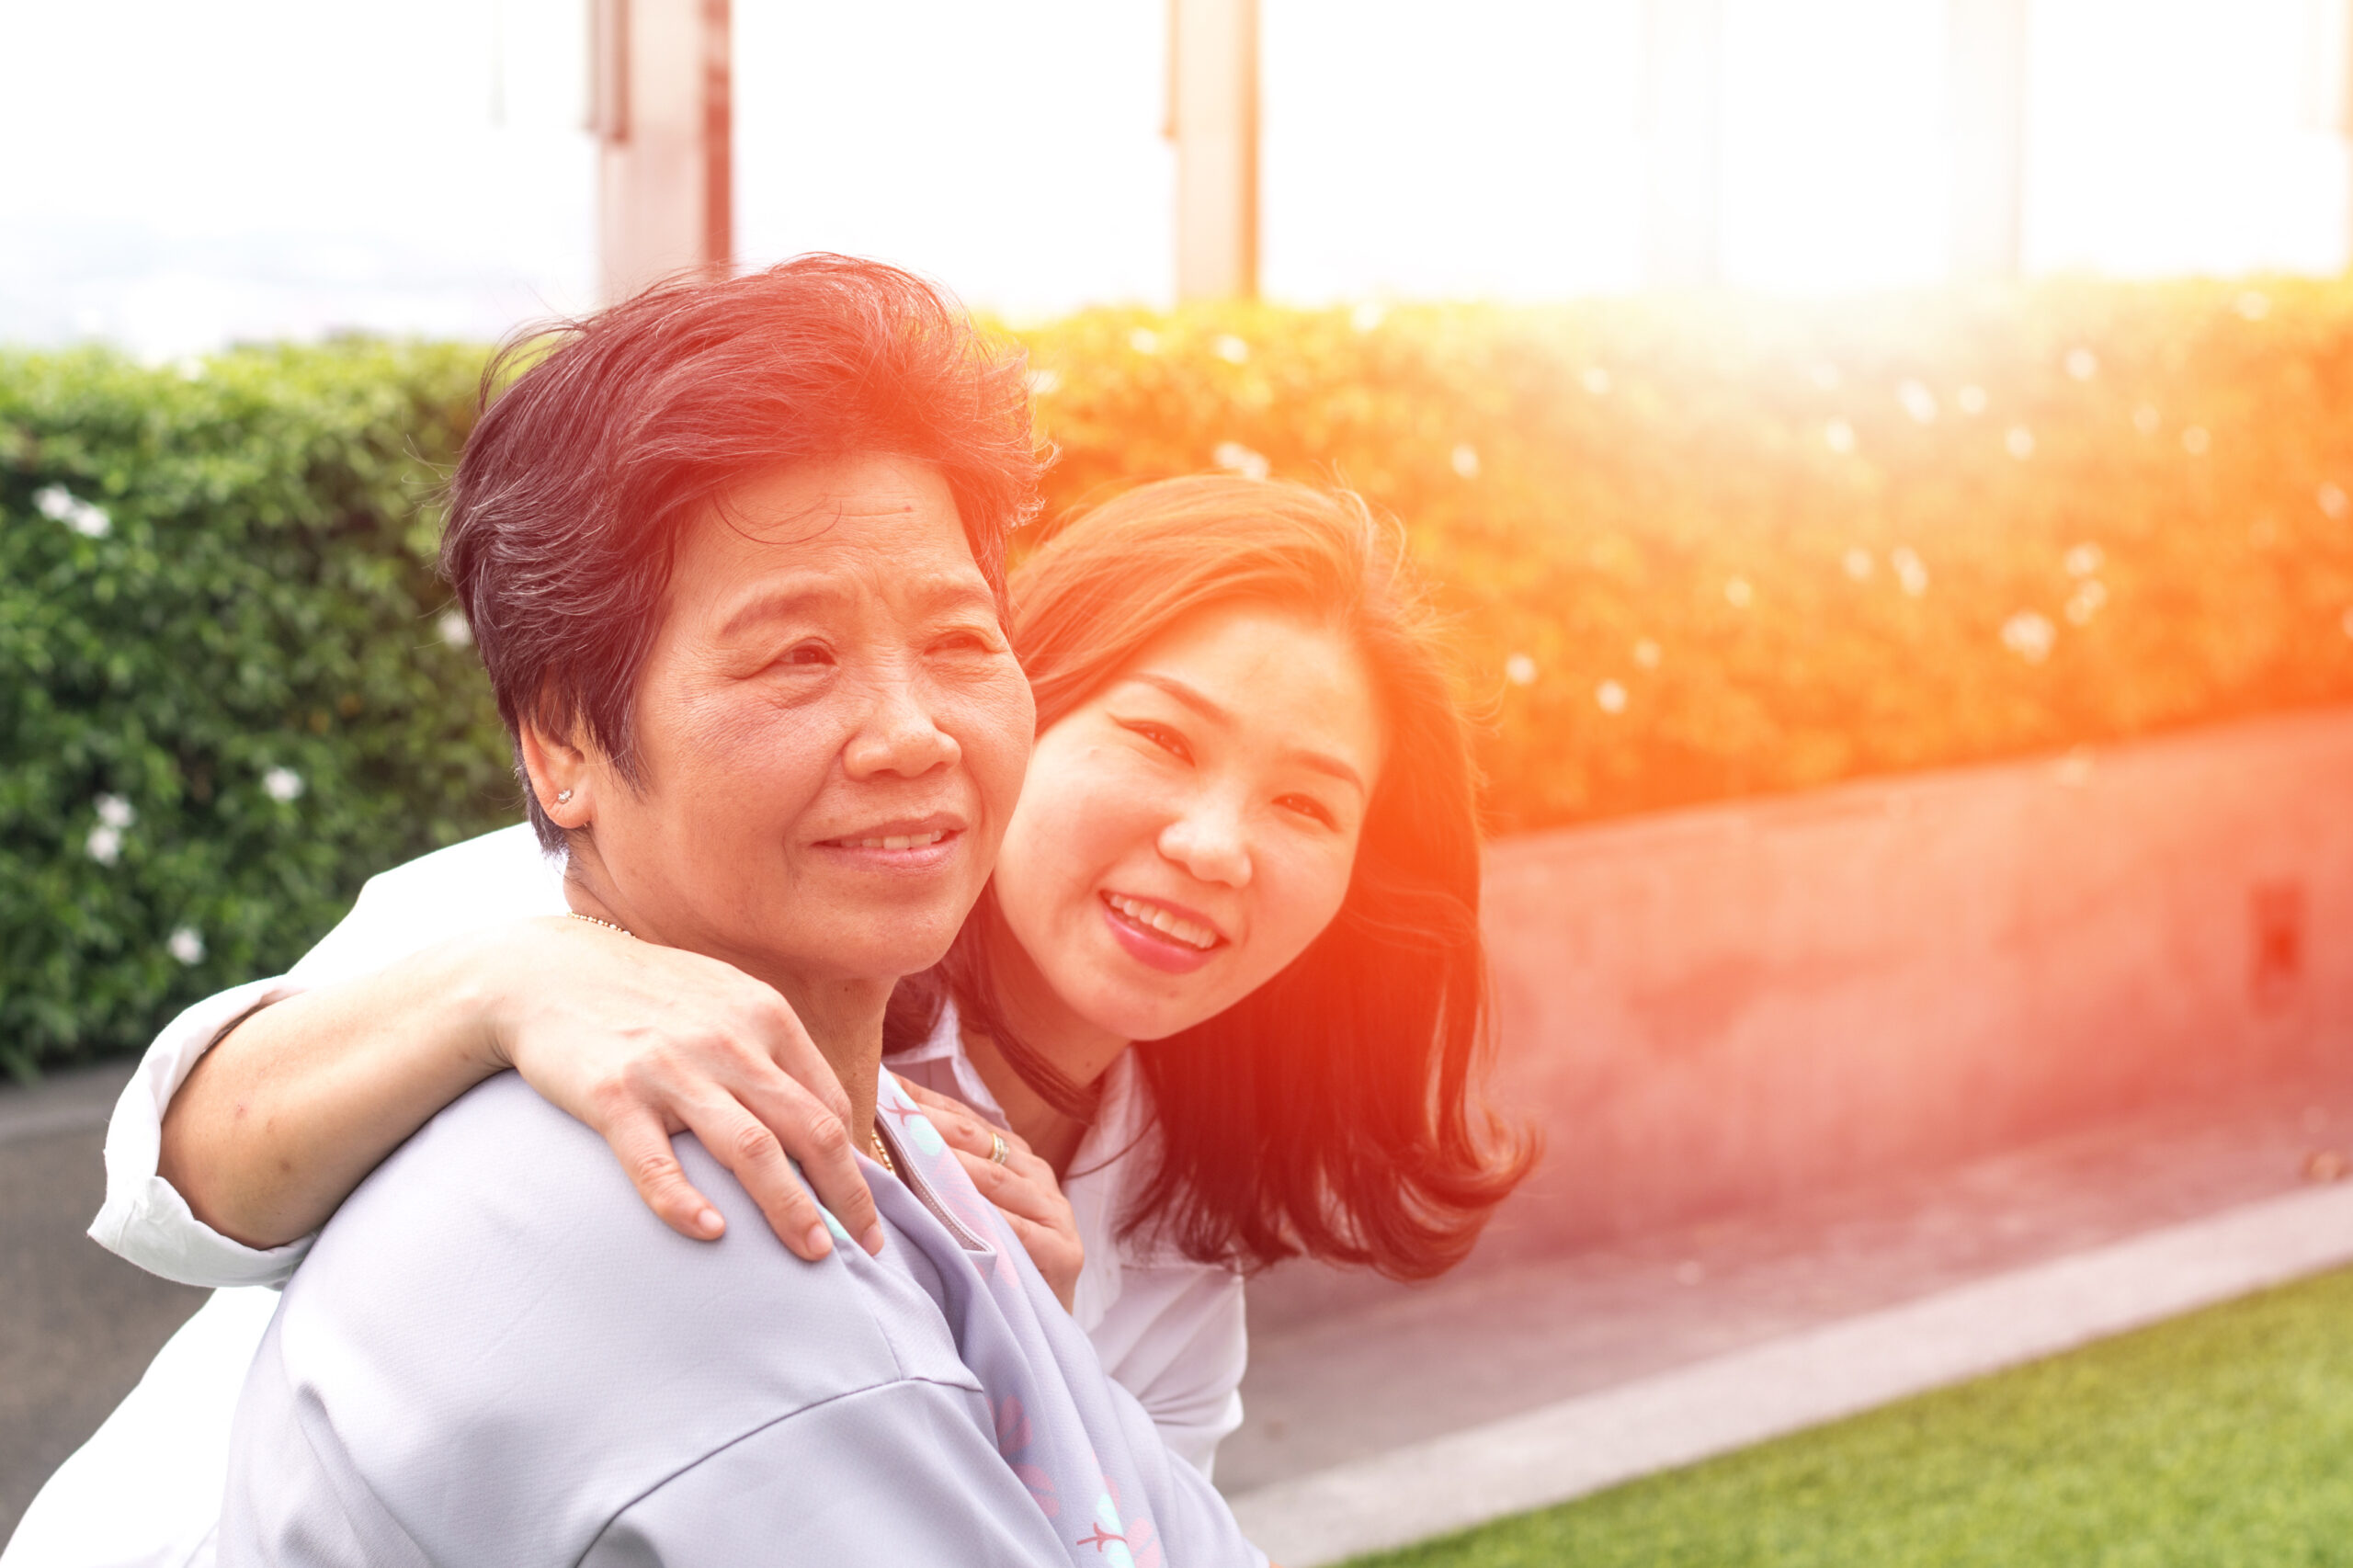 Pretty, young Asian woman with her arms around an older Asian woman outdoors during sunset